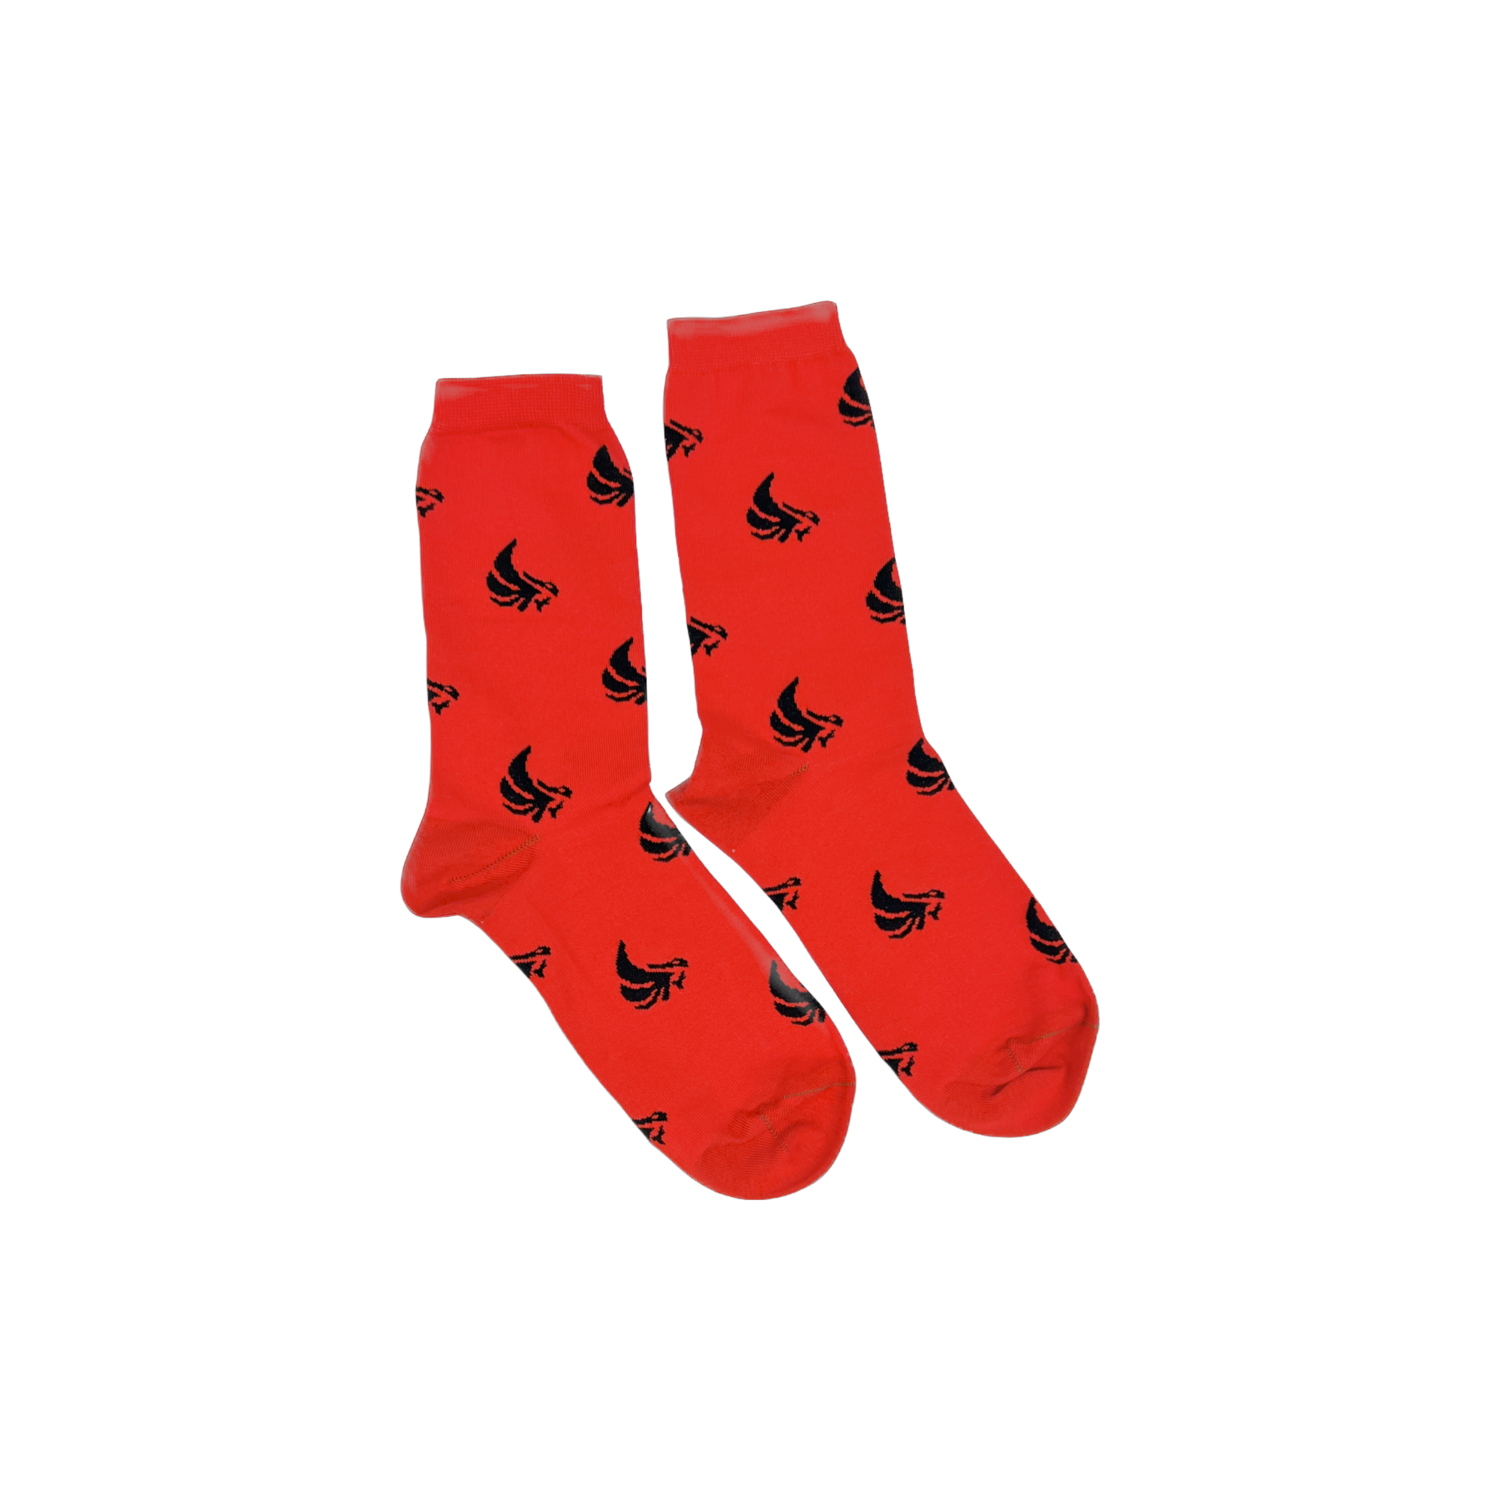 BLACK ICON - RED SOCKS, SIZE: YOUTH